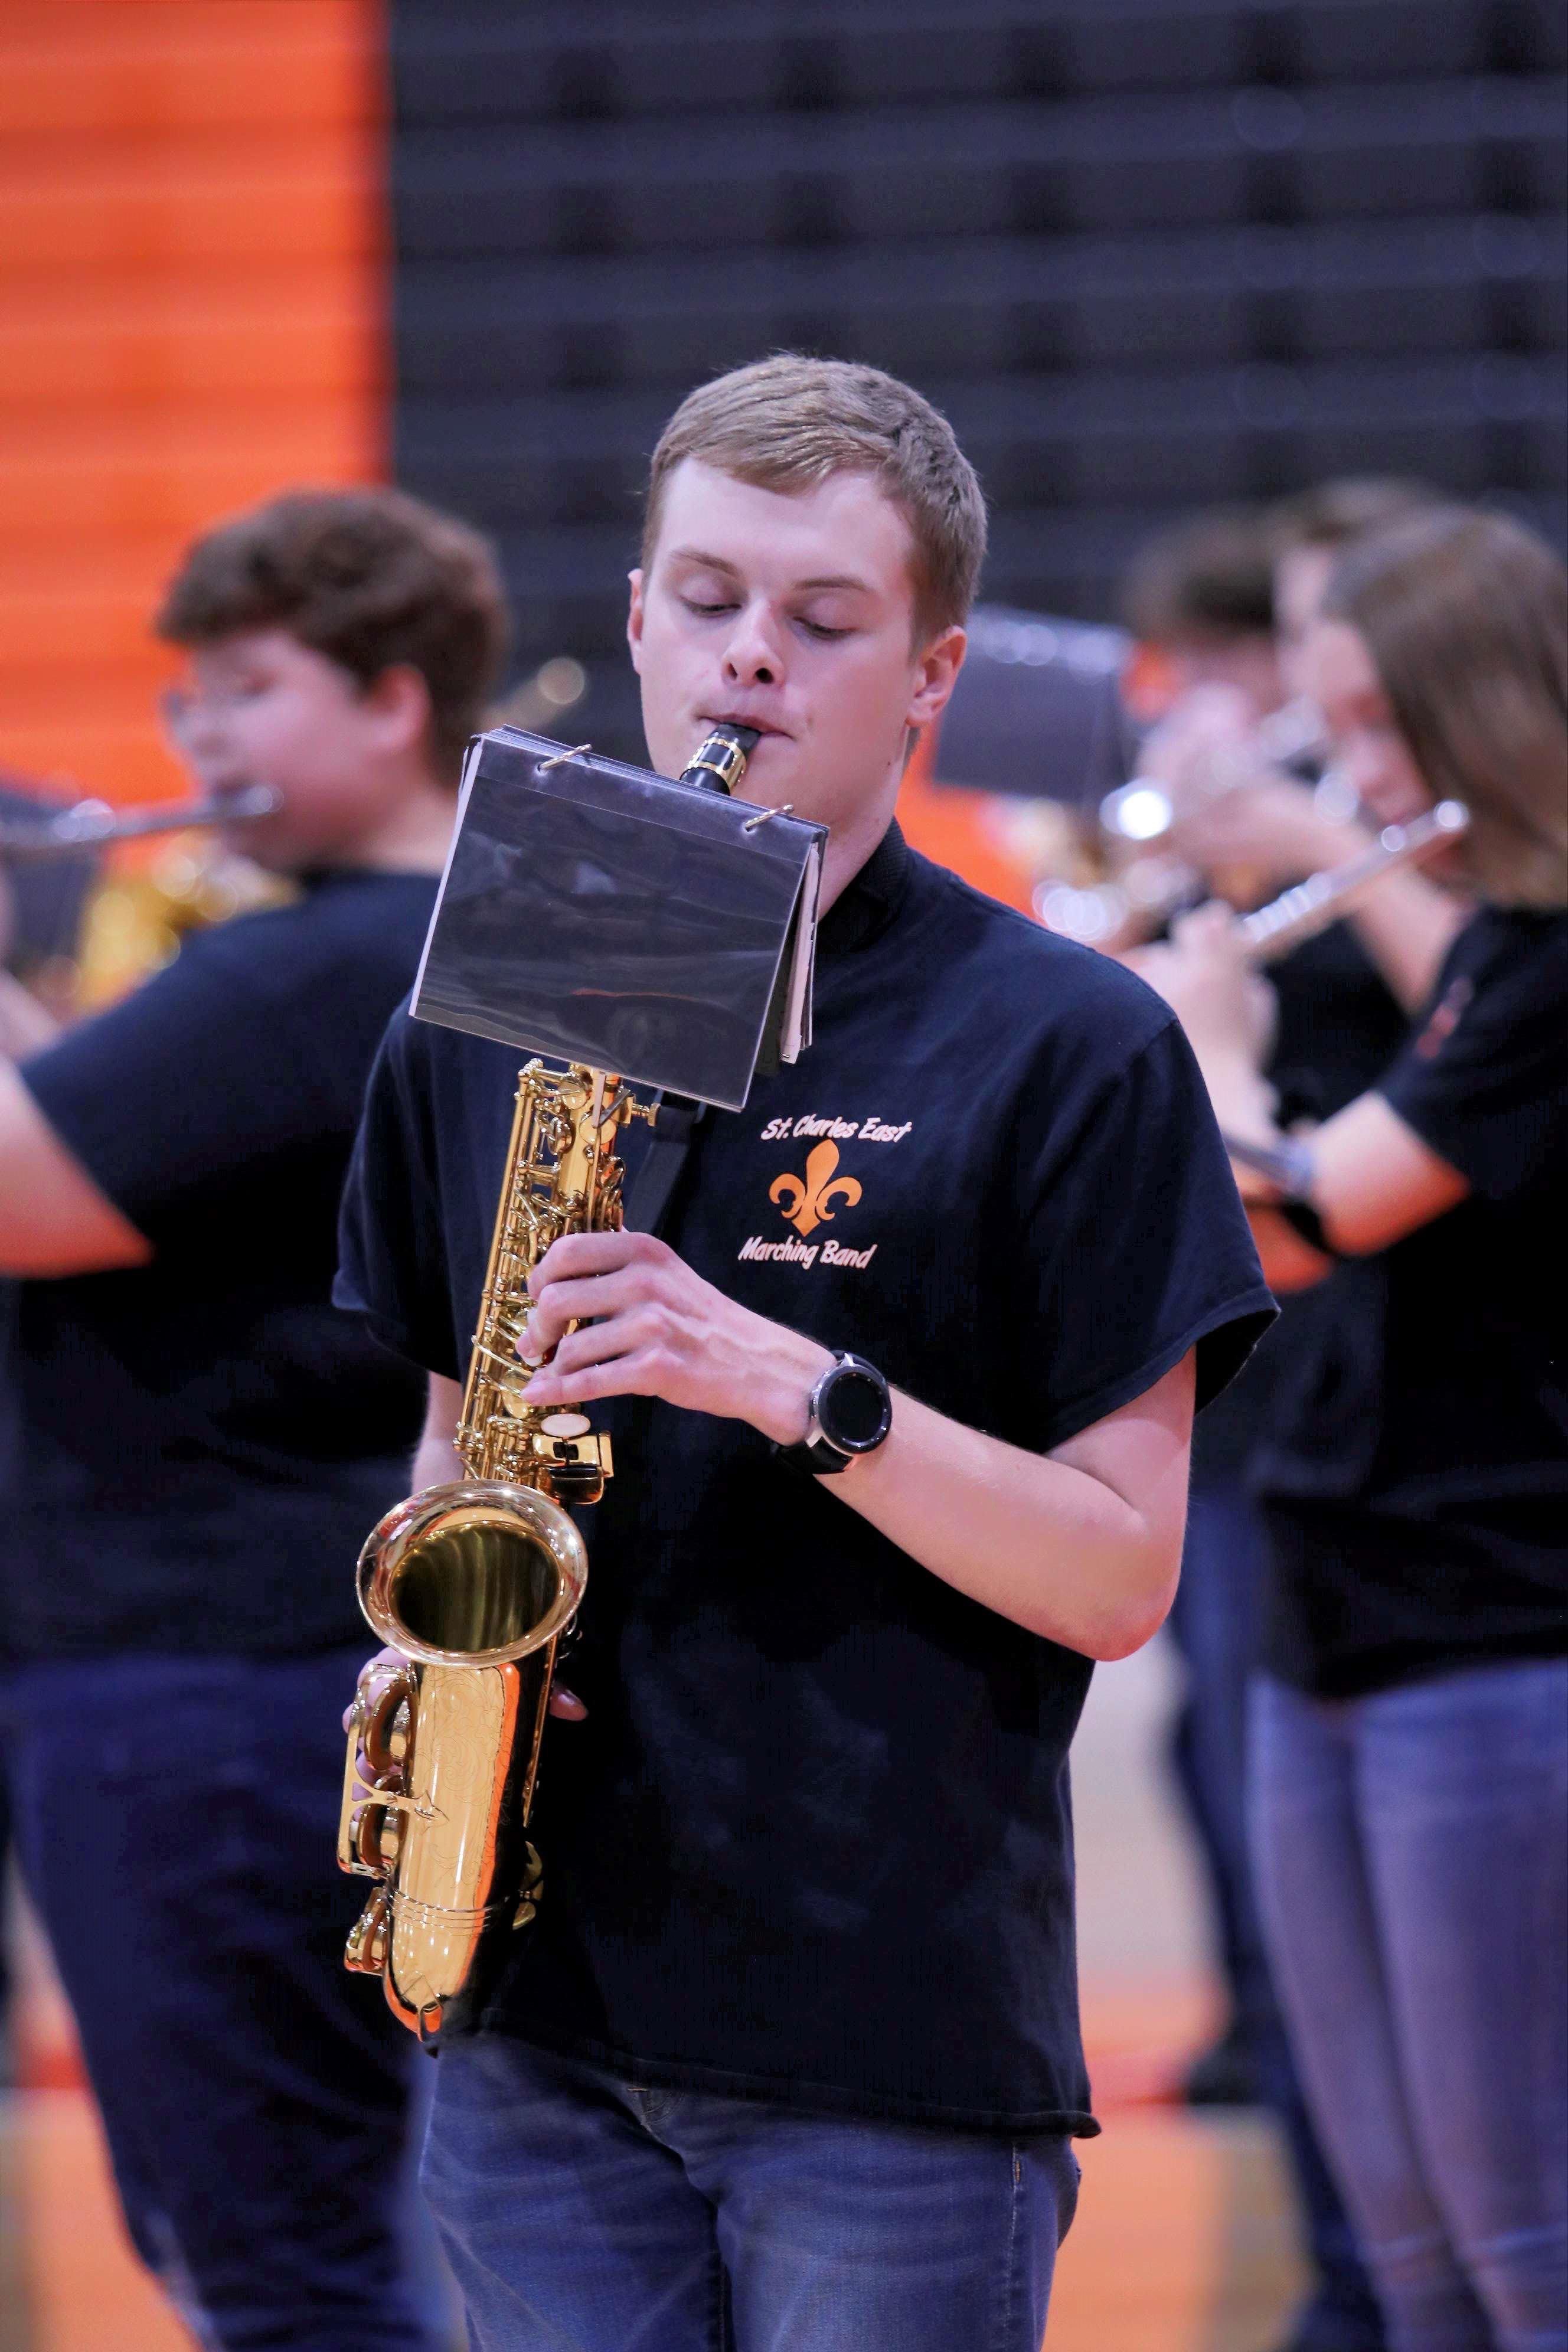 A picture of me playing Saxophone with my high school's marching band.